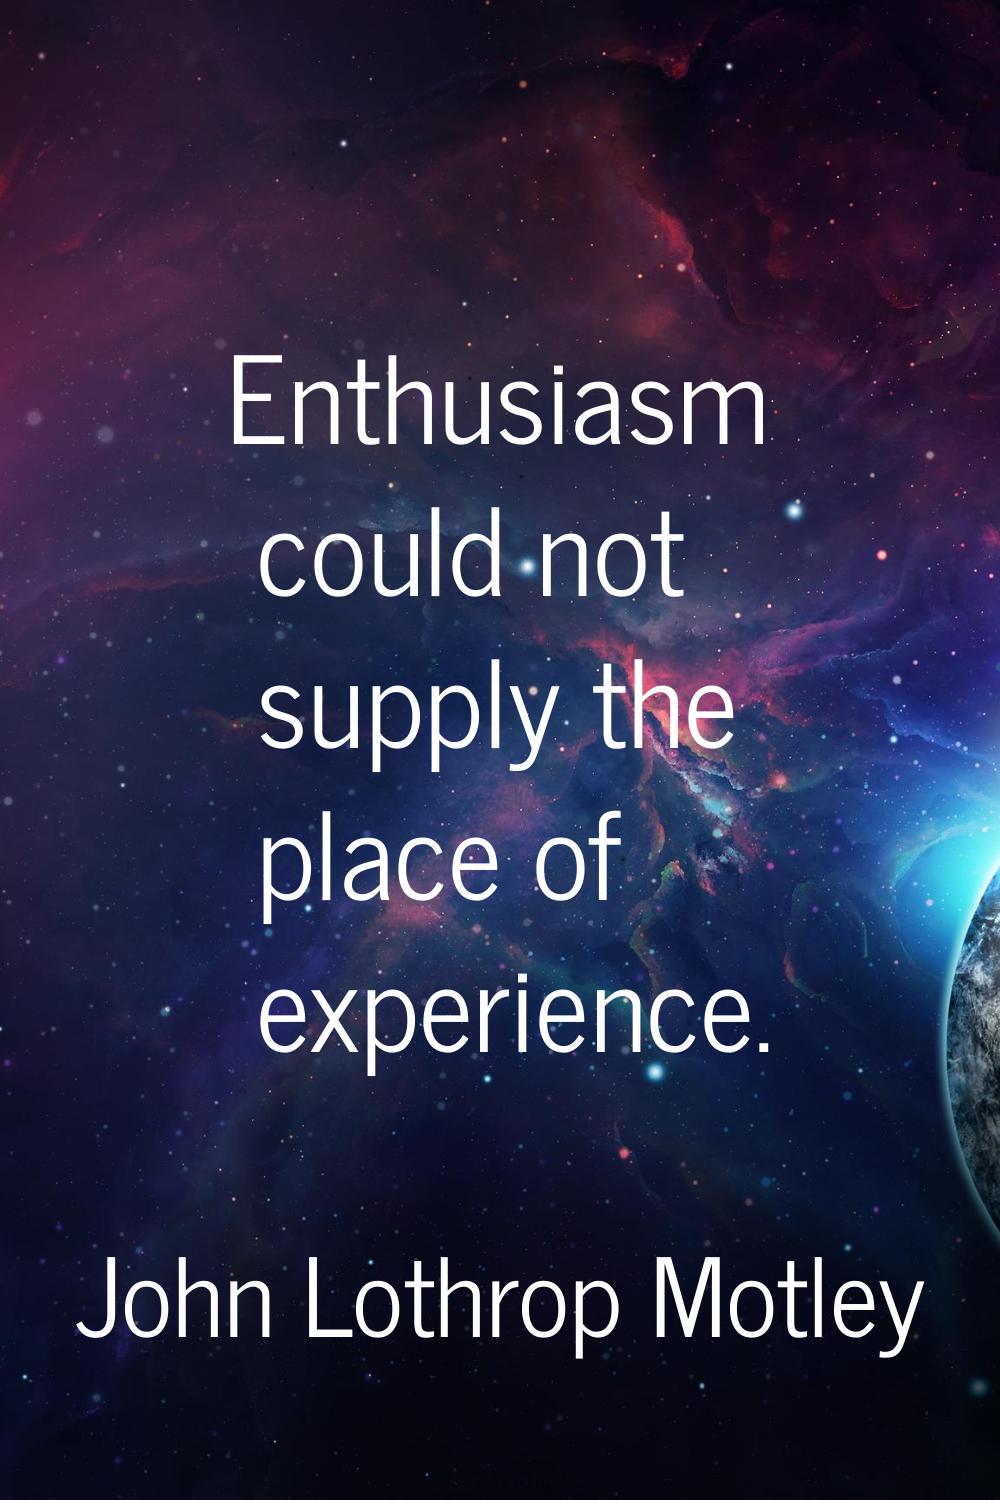 Enthusiasm could not supply the place of experience.